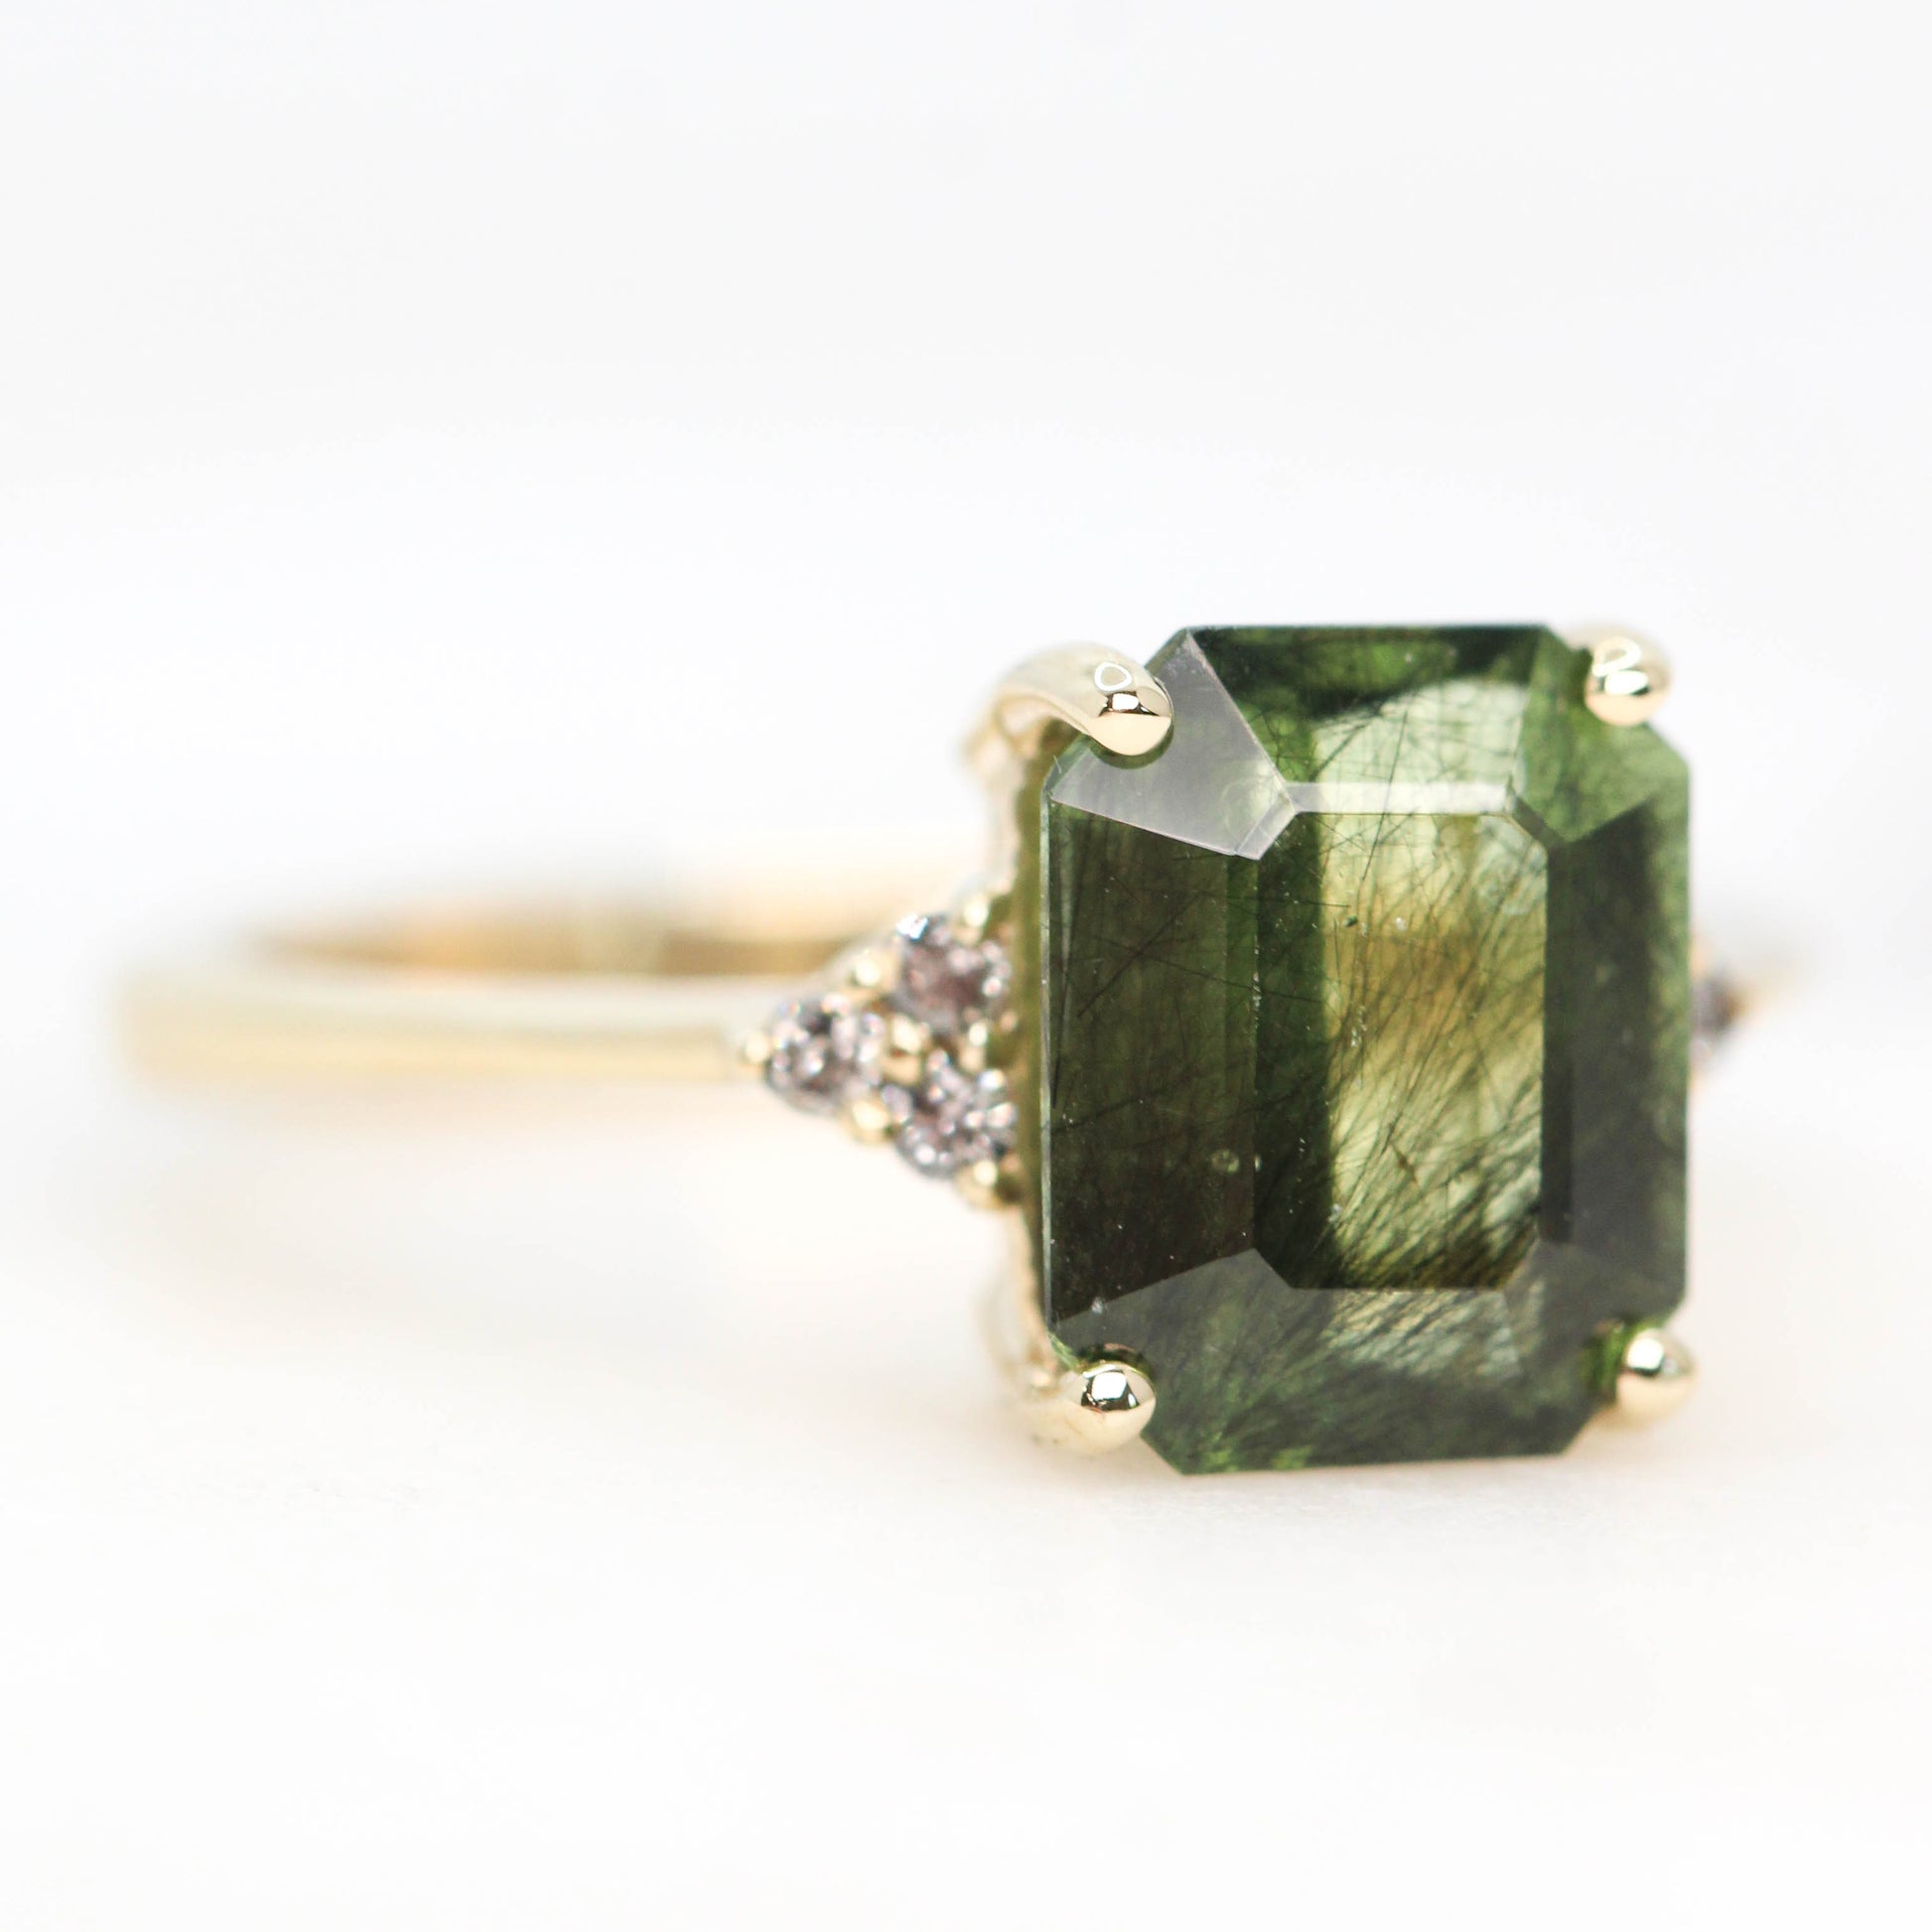 Imogene Ring with a 3.65 Carat Emerald Cut Peridot and Gray Accent Diamonds in 14k Yellow Gold - Ready to Size and Ship - Midwinter Co. Alternative Bridal Rings and Modern Fine Jewelry